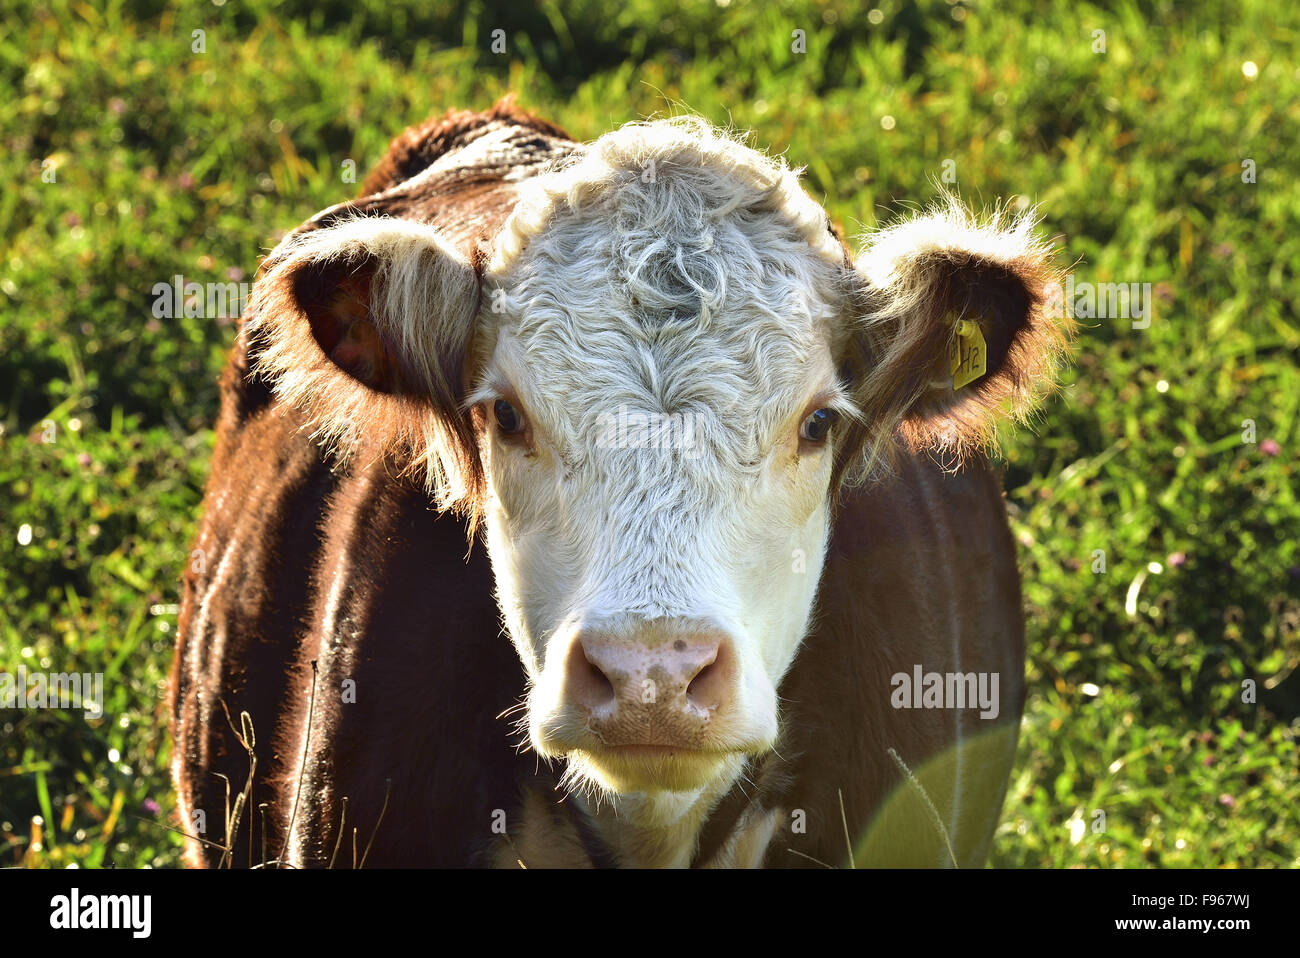 A close up image of a Herford beef cow backlit by the bright sun light looking forward in a green pasture in rural New Stock Photo